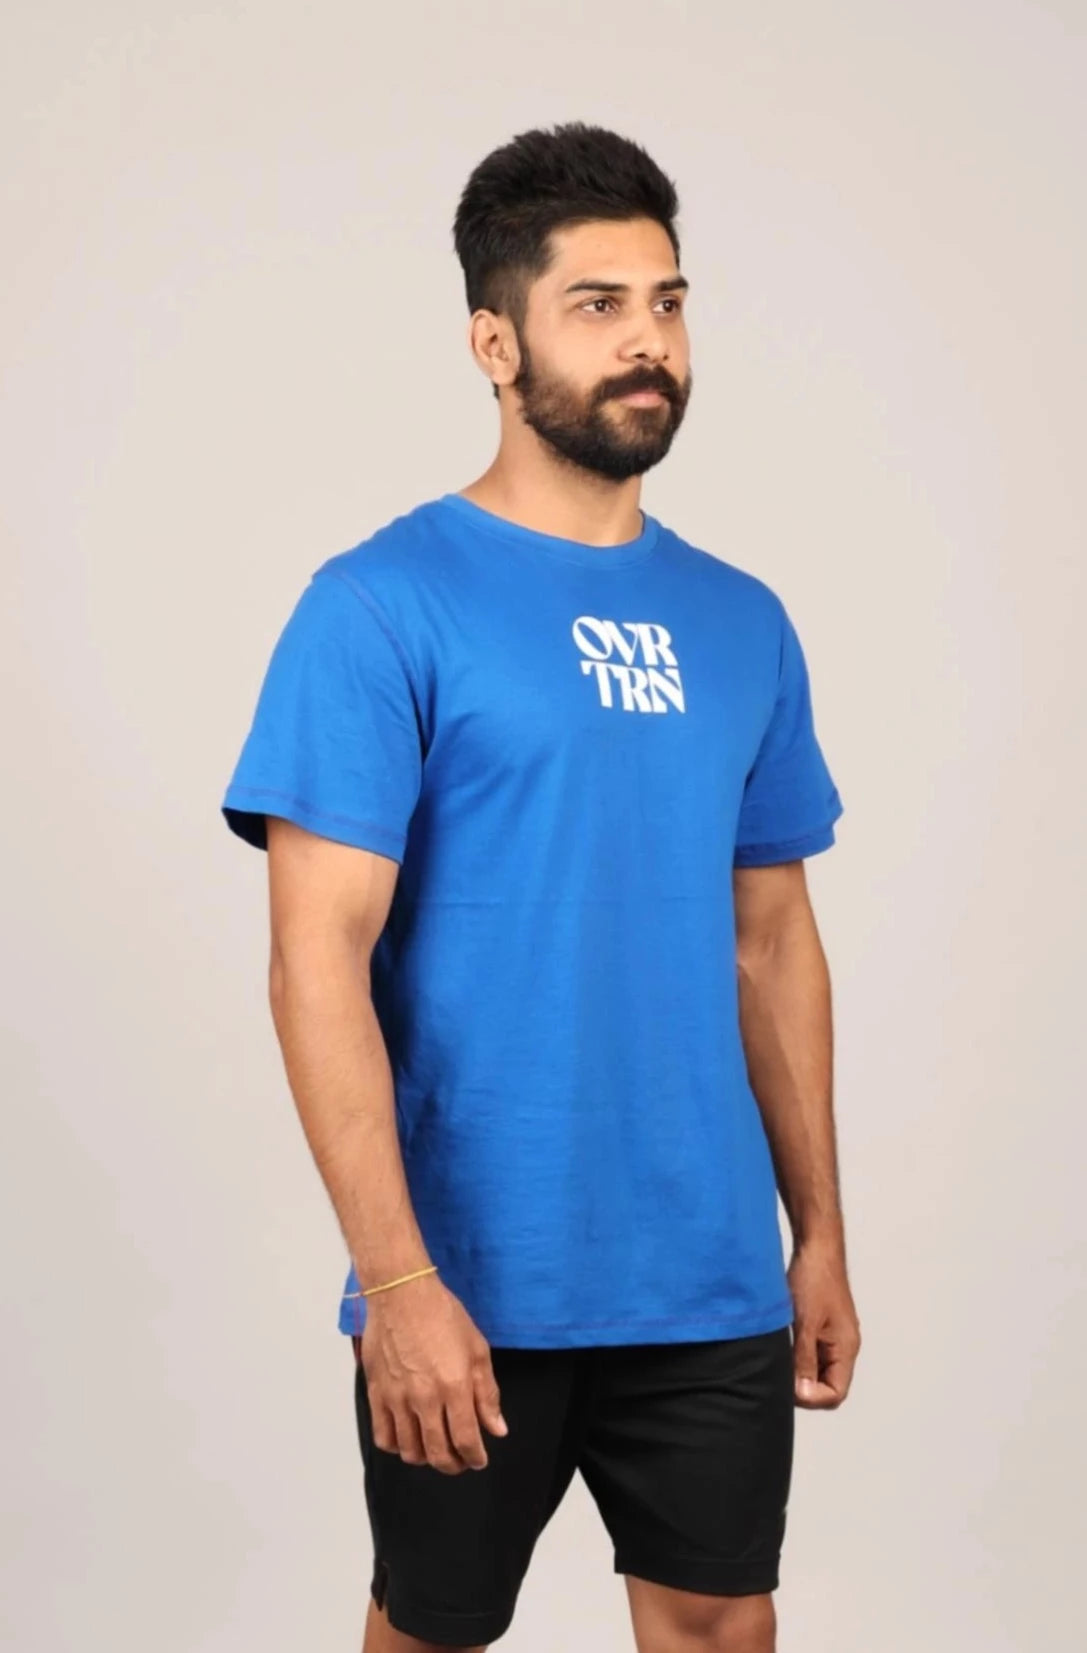 Blue Fly Relaxed Fit T-Shirt